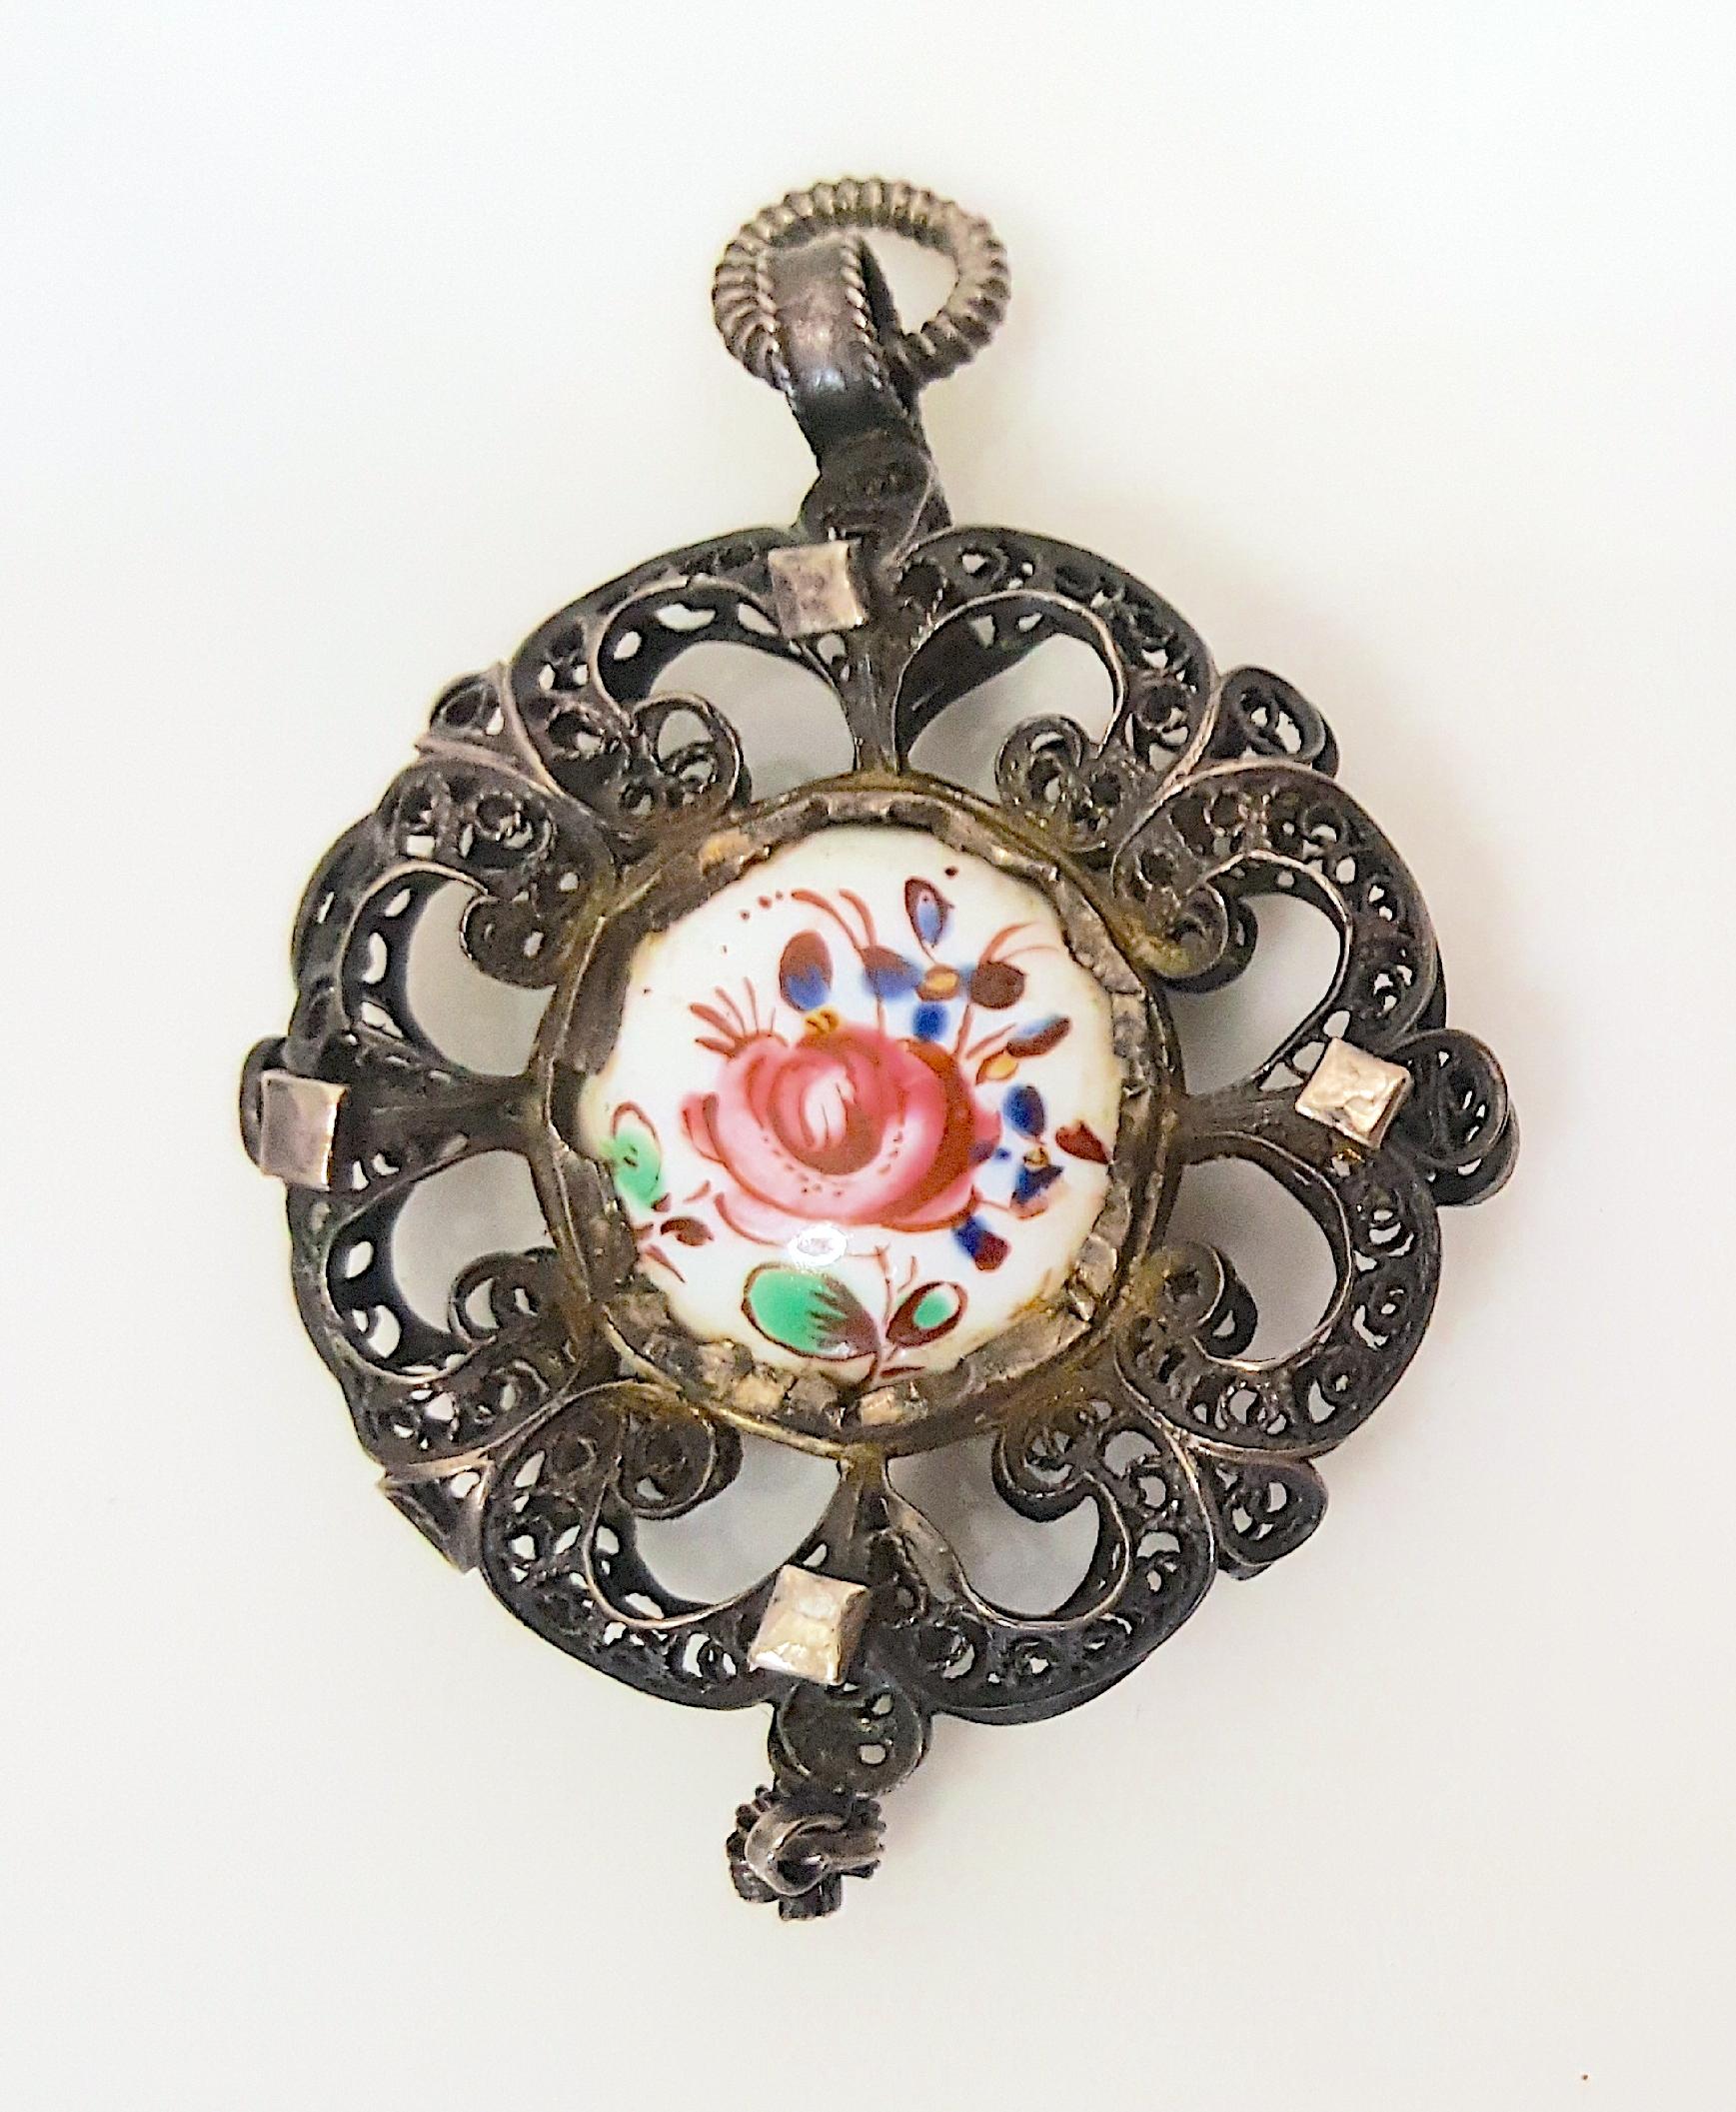 This early 18th-Century Spanish Rococo period silver-filigree double-sided pendant with dangle features miniature colorful enamel devotional paintings on both sides of a white porcelain centerpiece, which are associated with an April birth.

One